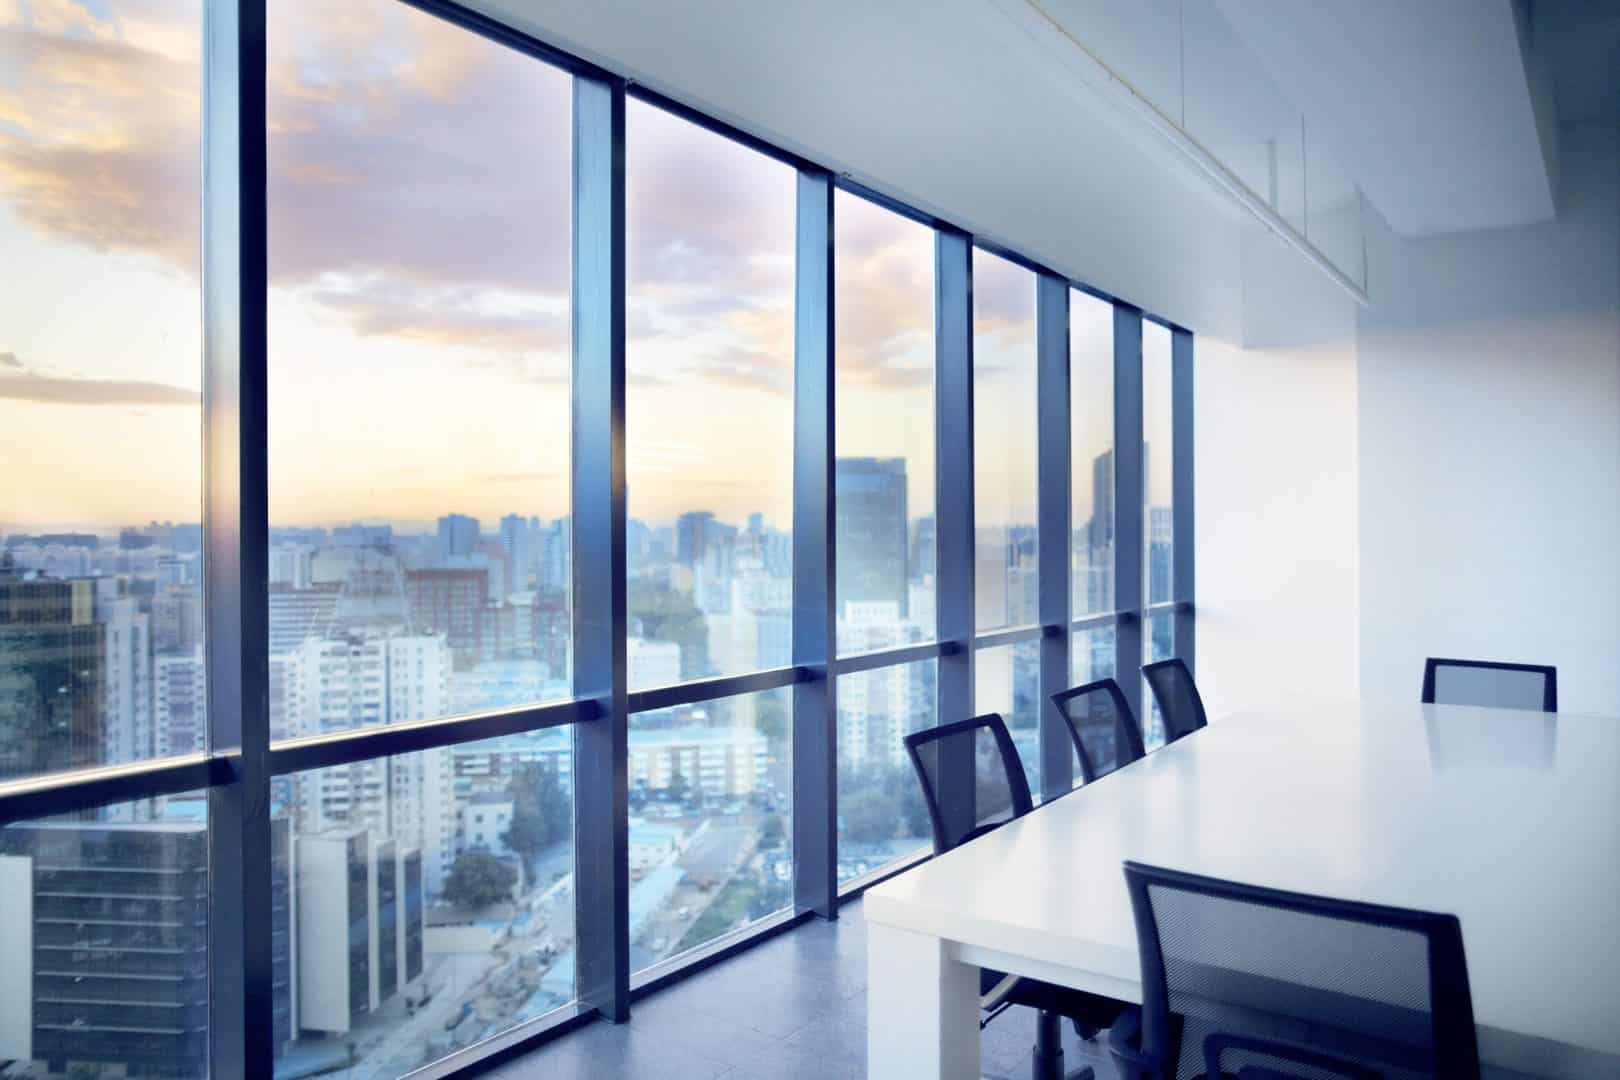 Meeting room with window view of cityscape clouds